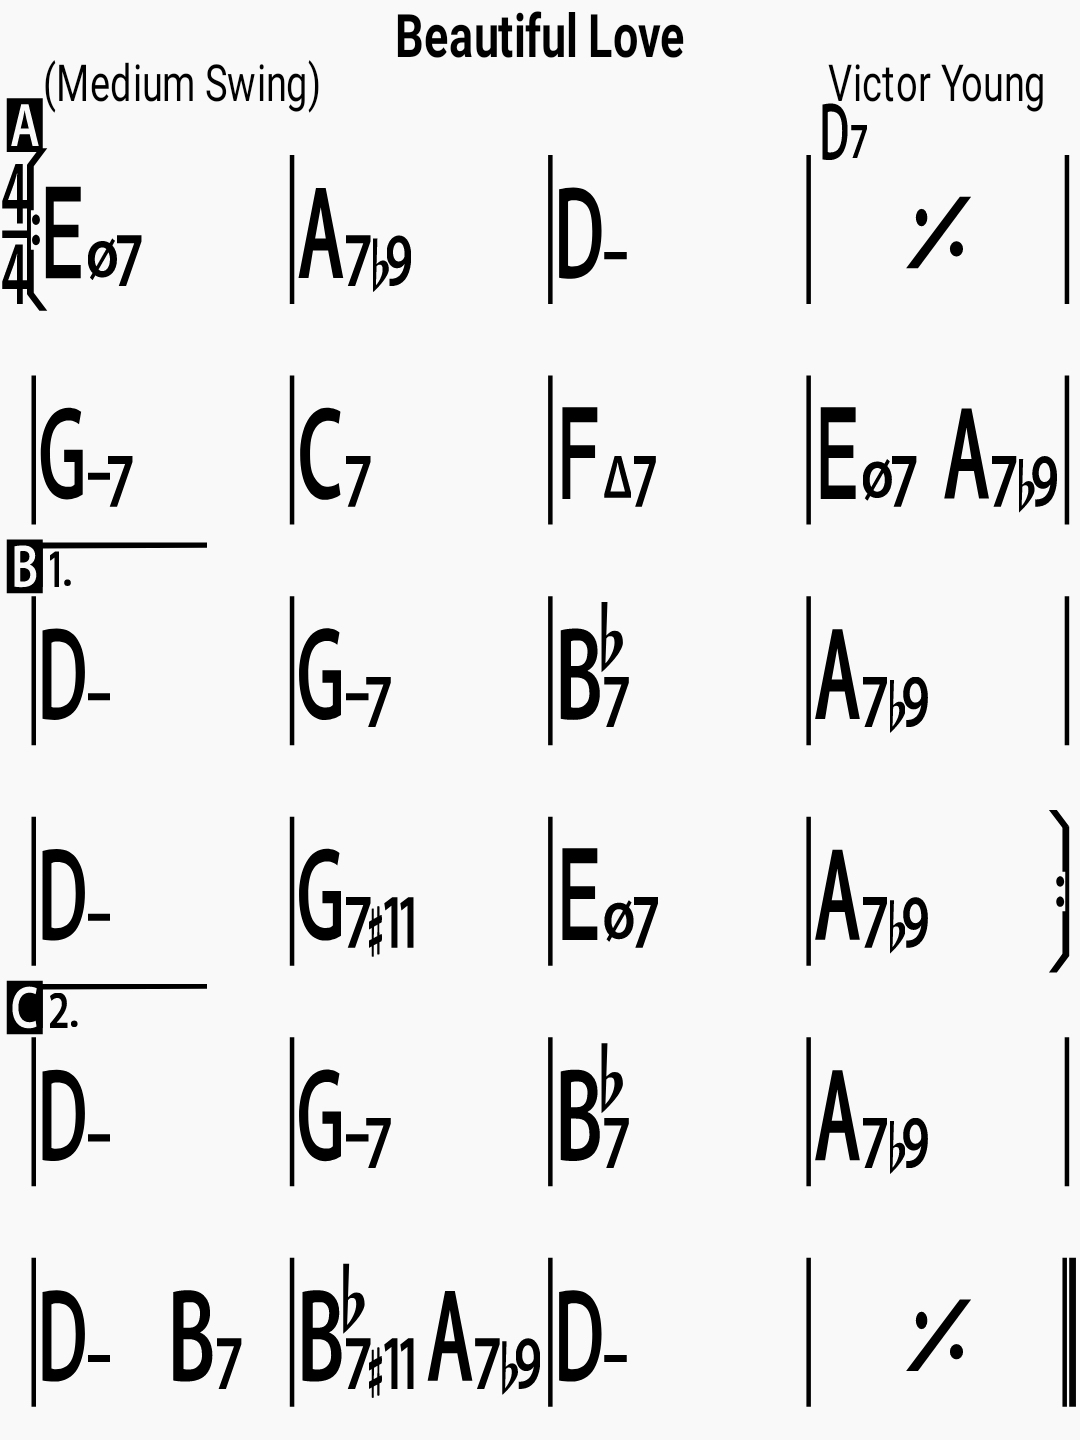 Chord chart for the jazz standard Beautiful Love